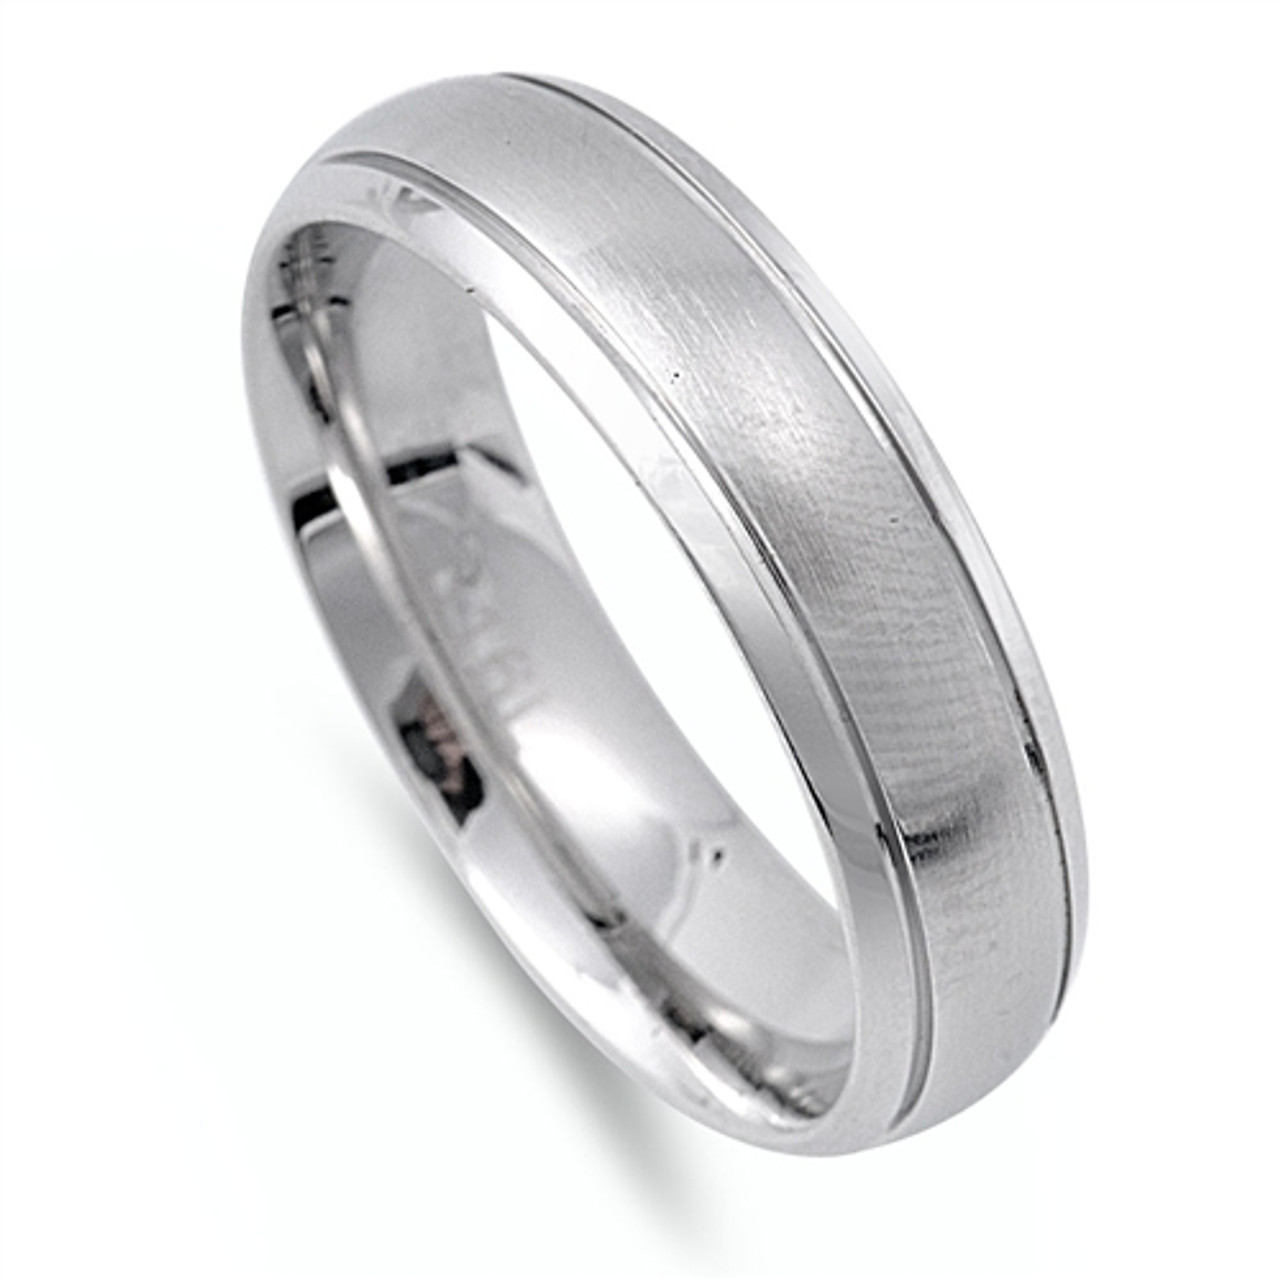 6mm Stainless Steel 2-tone Ring - Free Engraving - ForeverGifts.com